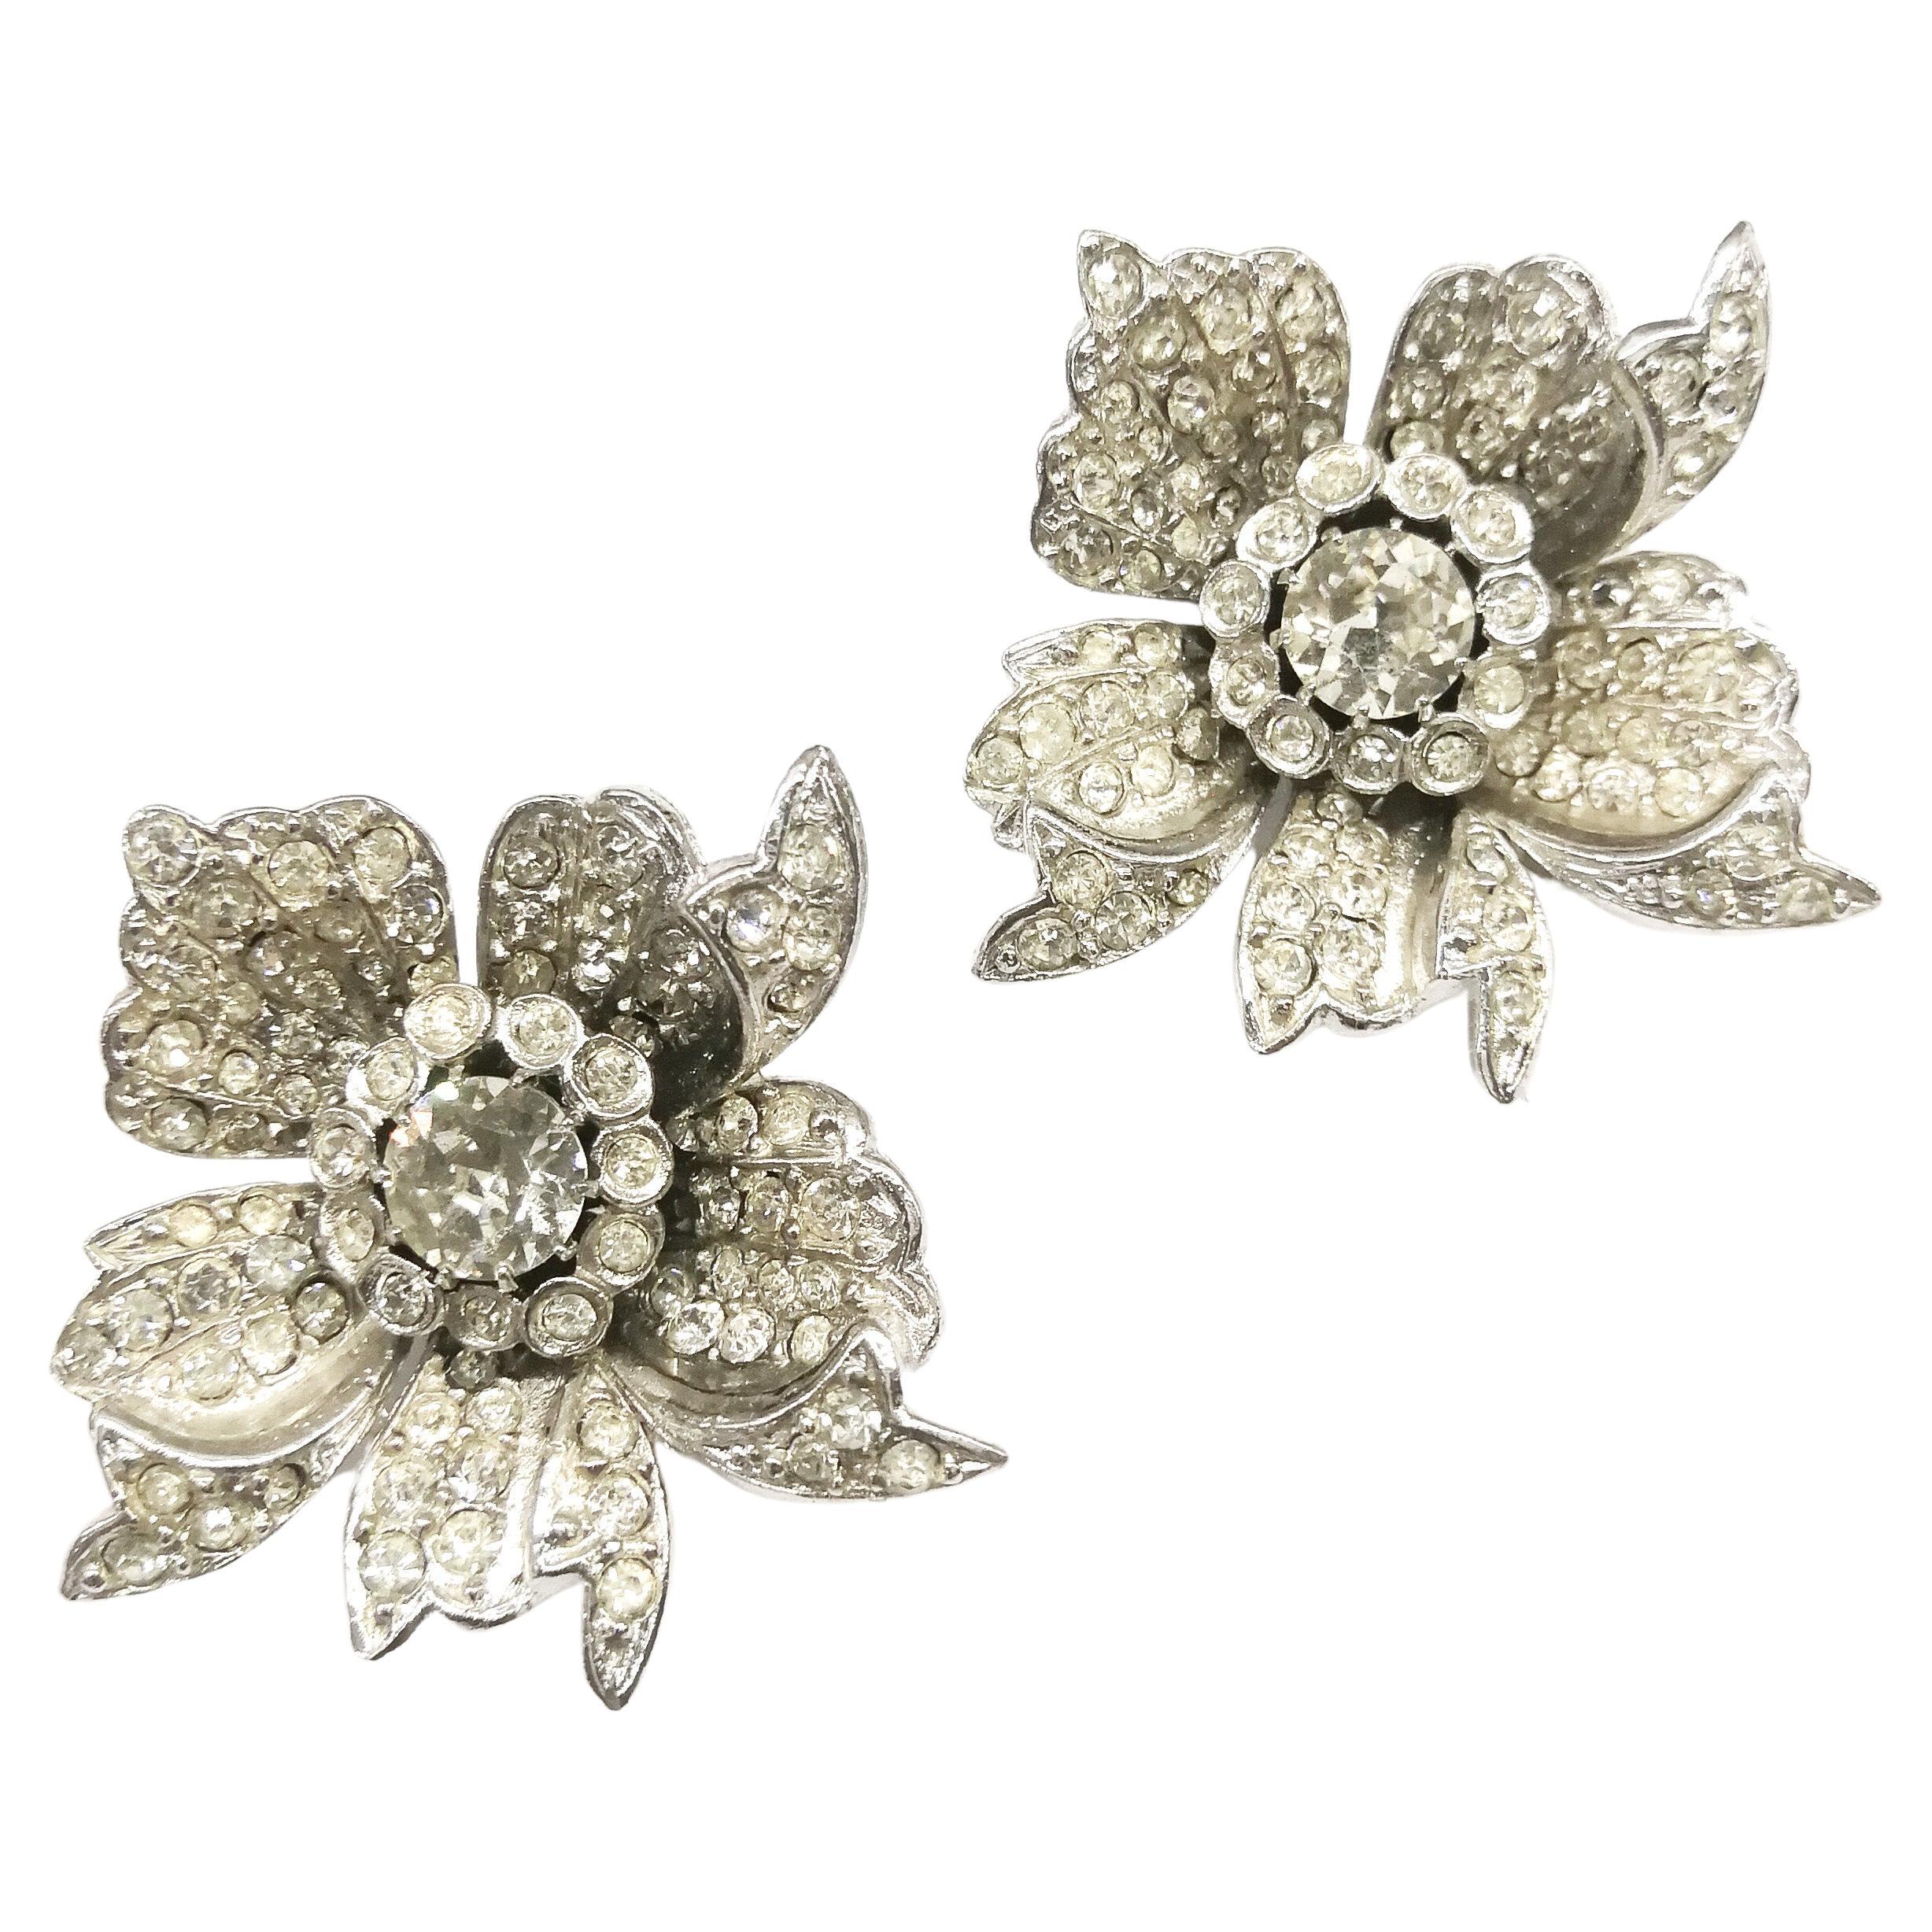 A striking pair of paste earrings in the form of a flower or rose, from the early 1950s. Although unsigned (as often happened with a brooch and earrings, where the brooch was signed and the earrings not signed), they are without doubt the matching